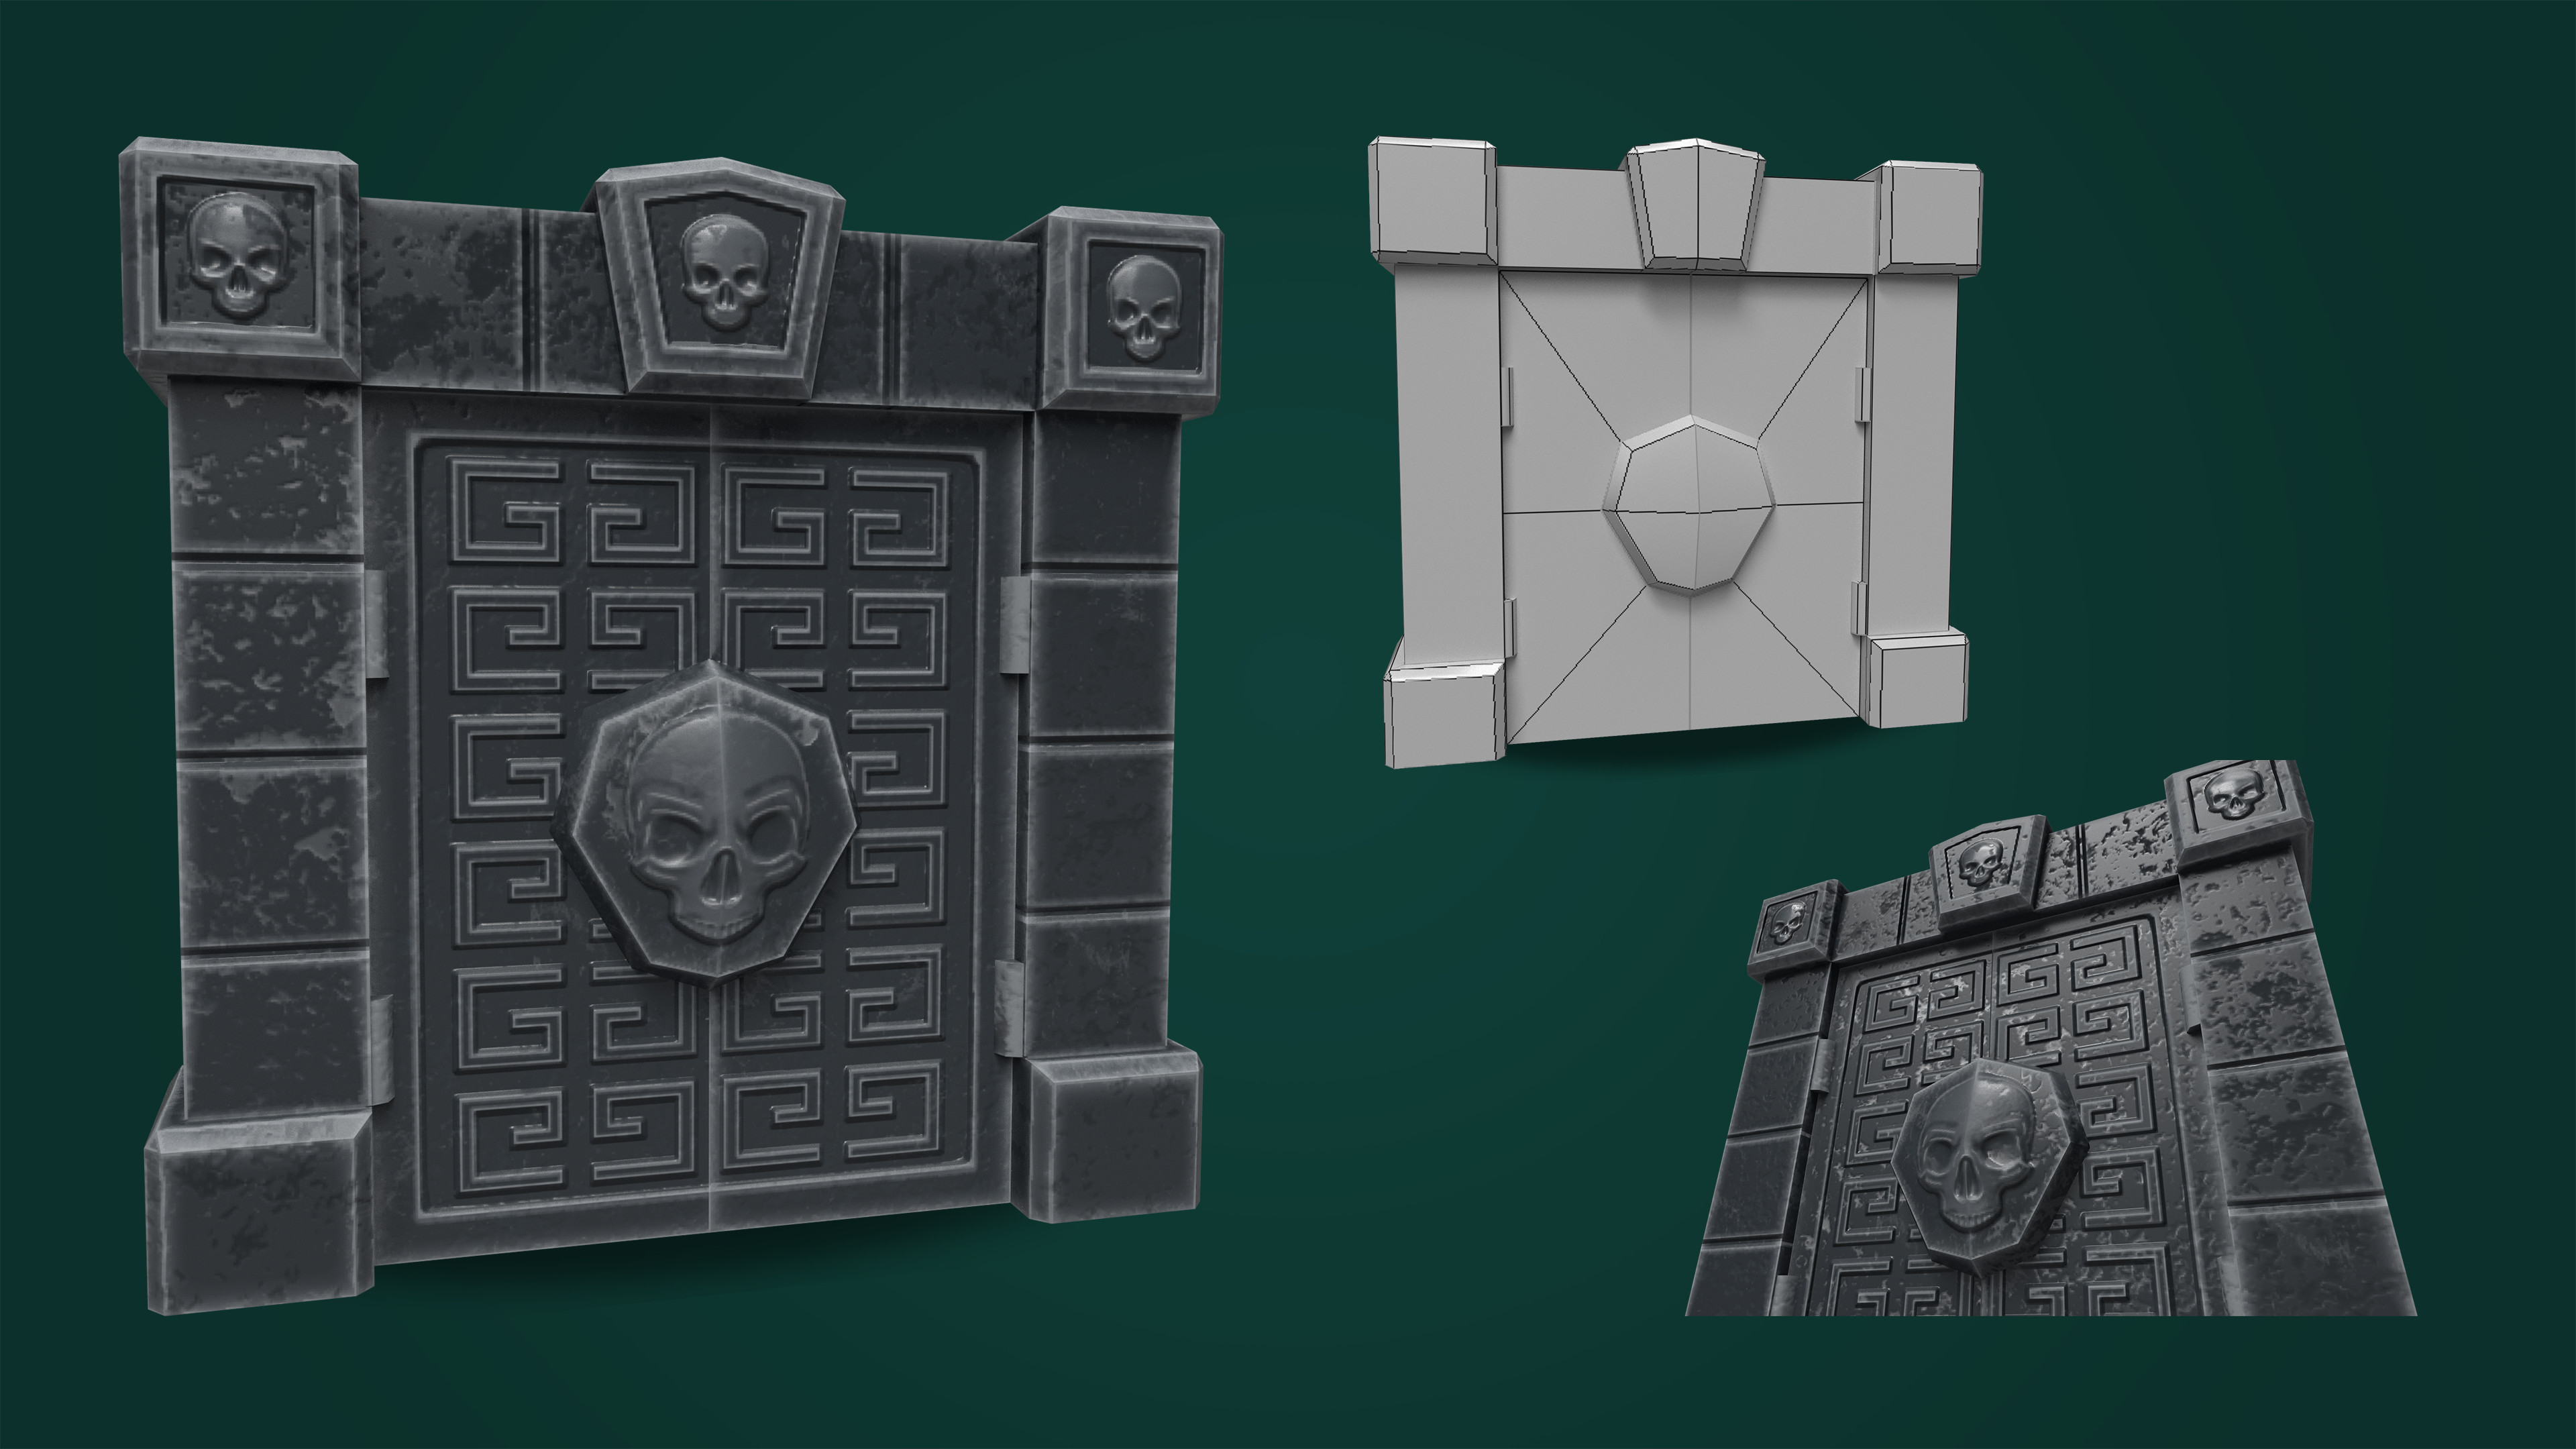 Stone Crypt Door.
Check it out on Sketchfab below!